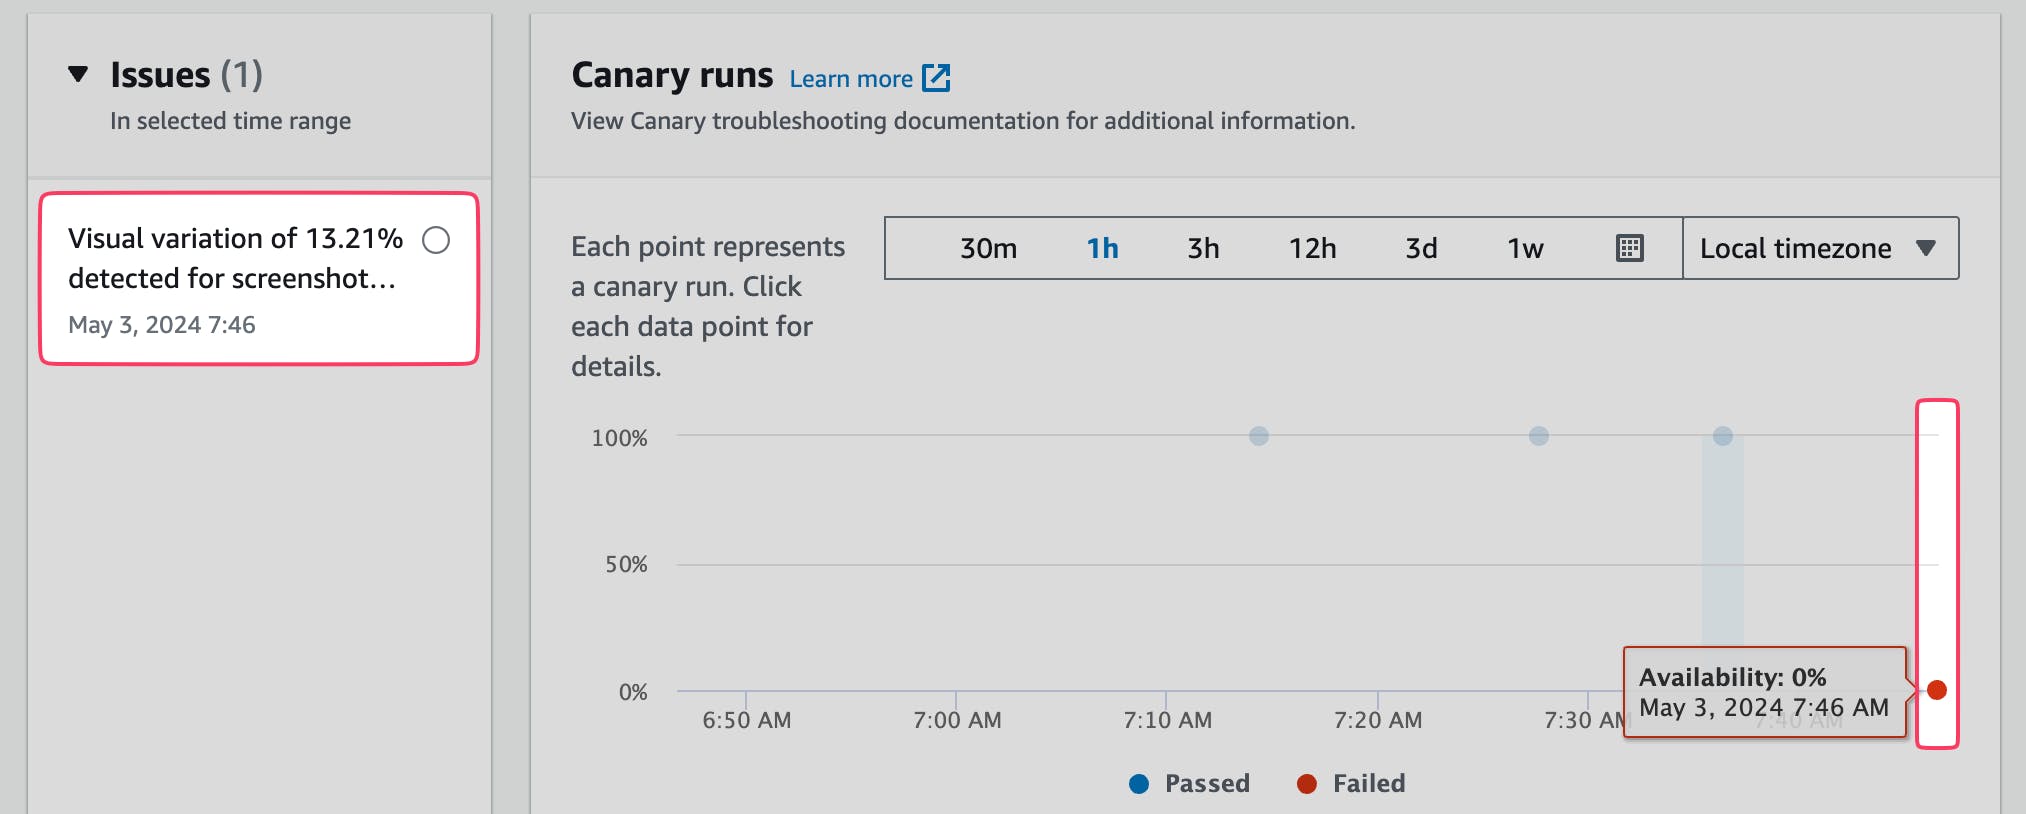 A screenshot of a monitoring dashboard showing "Canary runs" with a graph displaying data points indicating pass and fail statuses over time. A highlighted issue box reports a "Visual variation of 13.21% detected for screenshot" with a timestamp of May 3, 2024, at 7:46 AM.